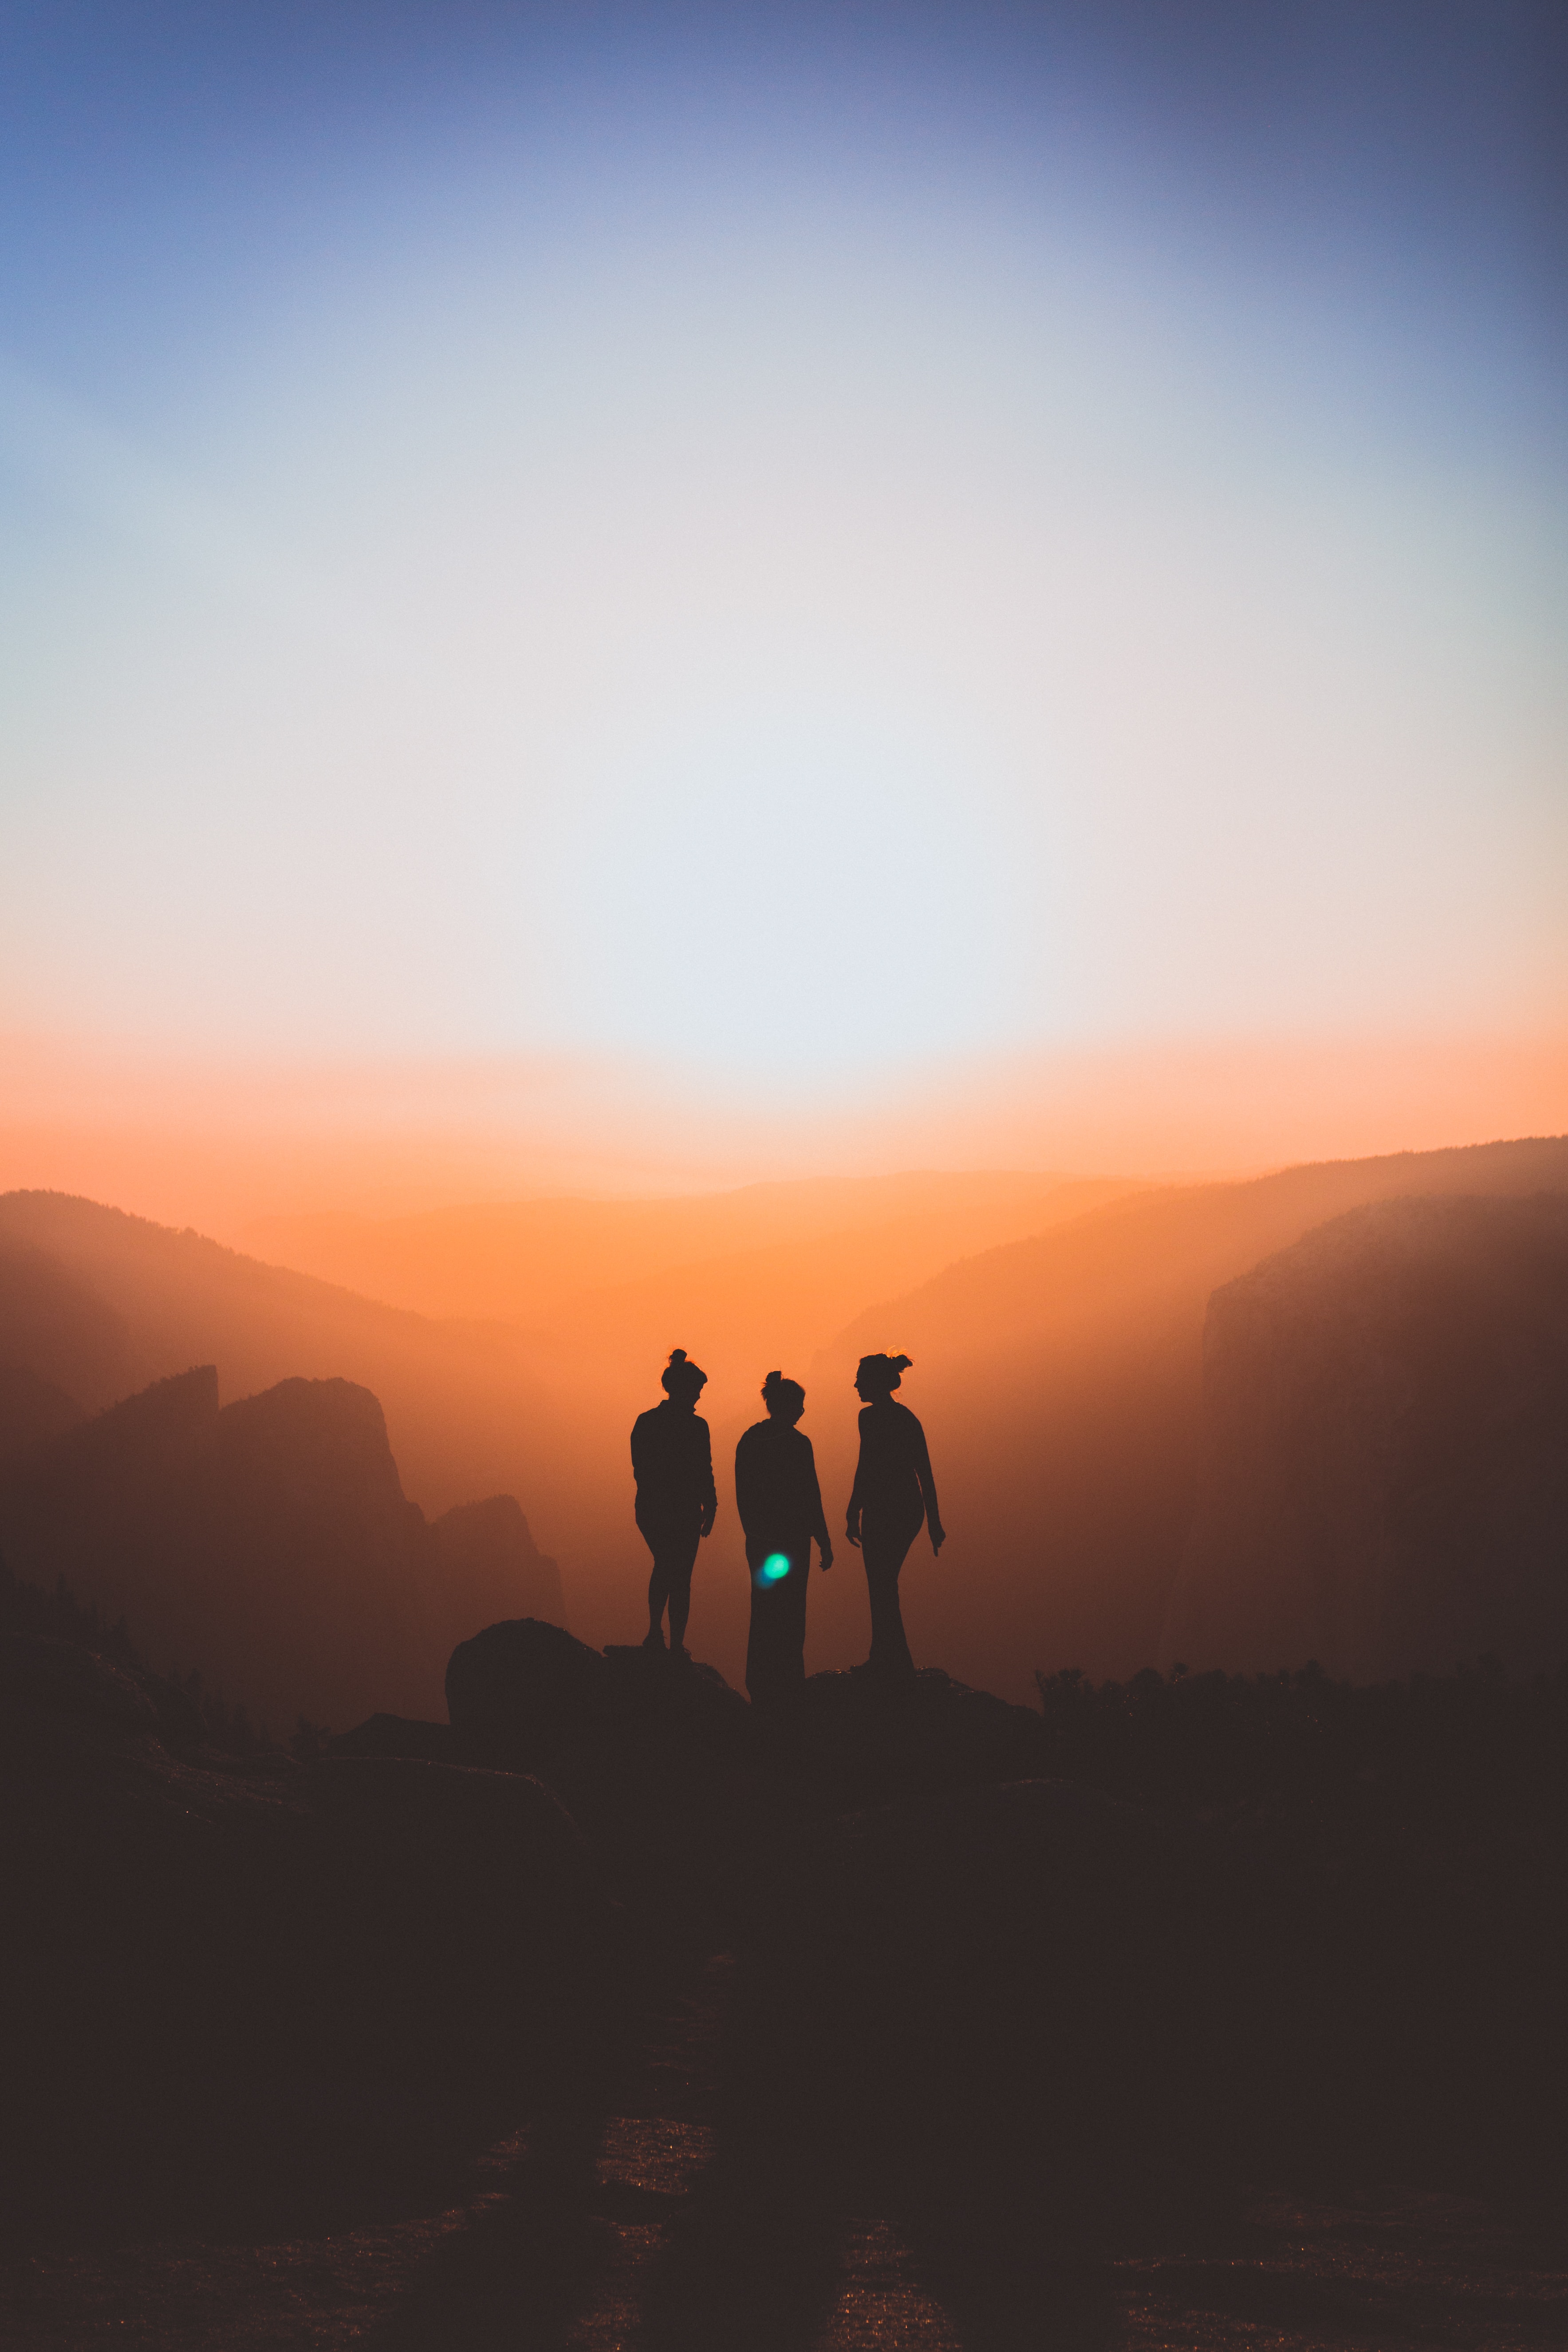 Three figures silhouetted by sunset in background, at Yosemite Park.